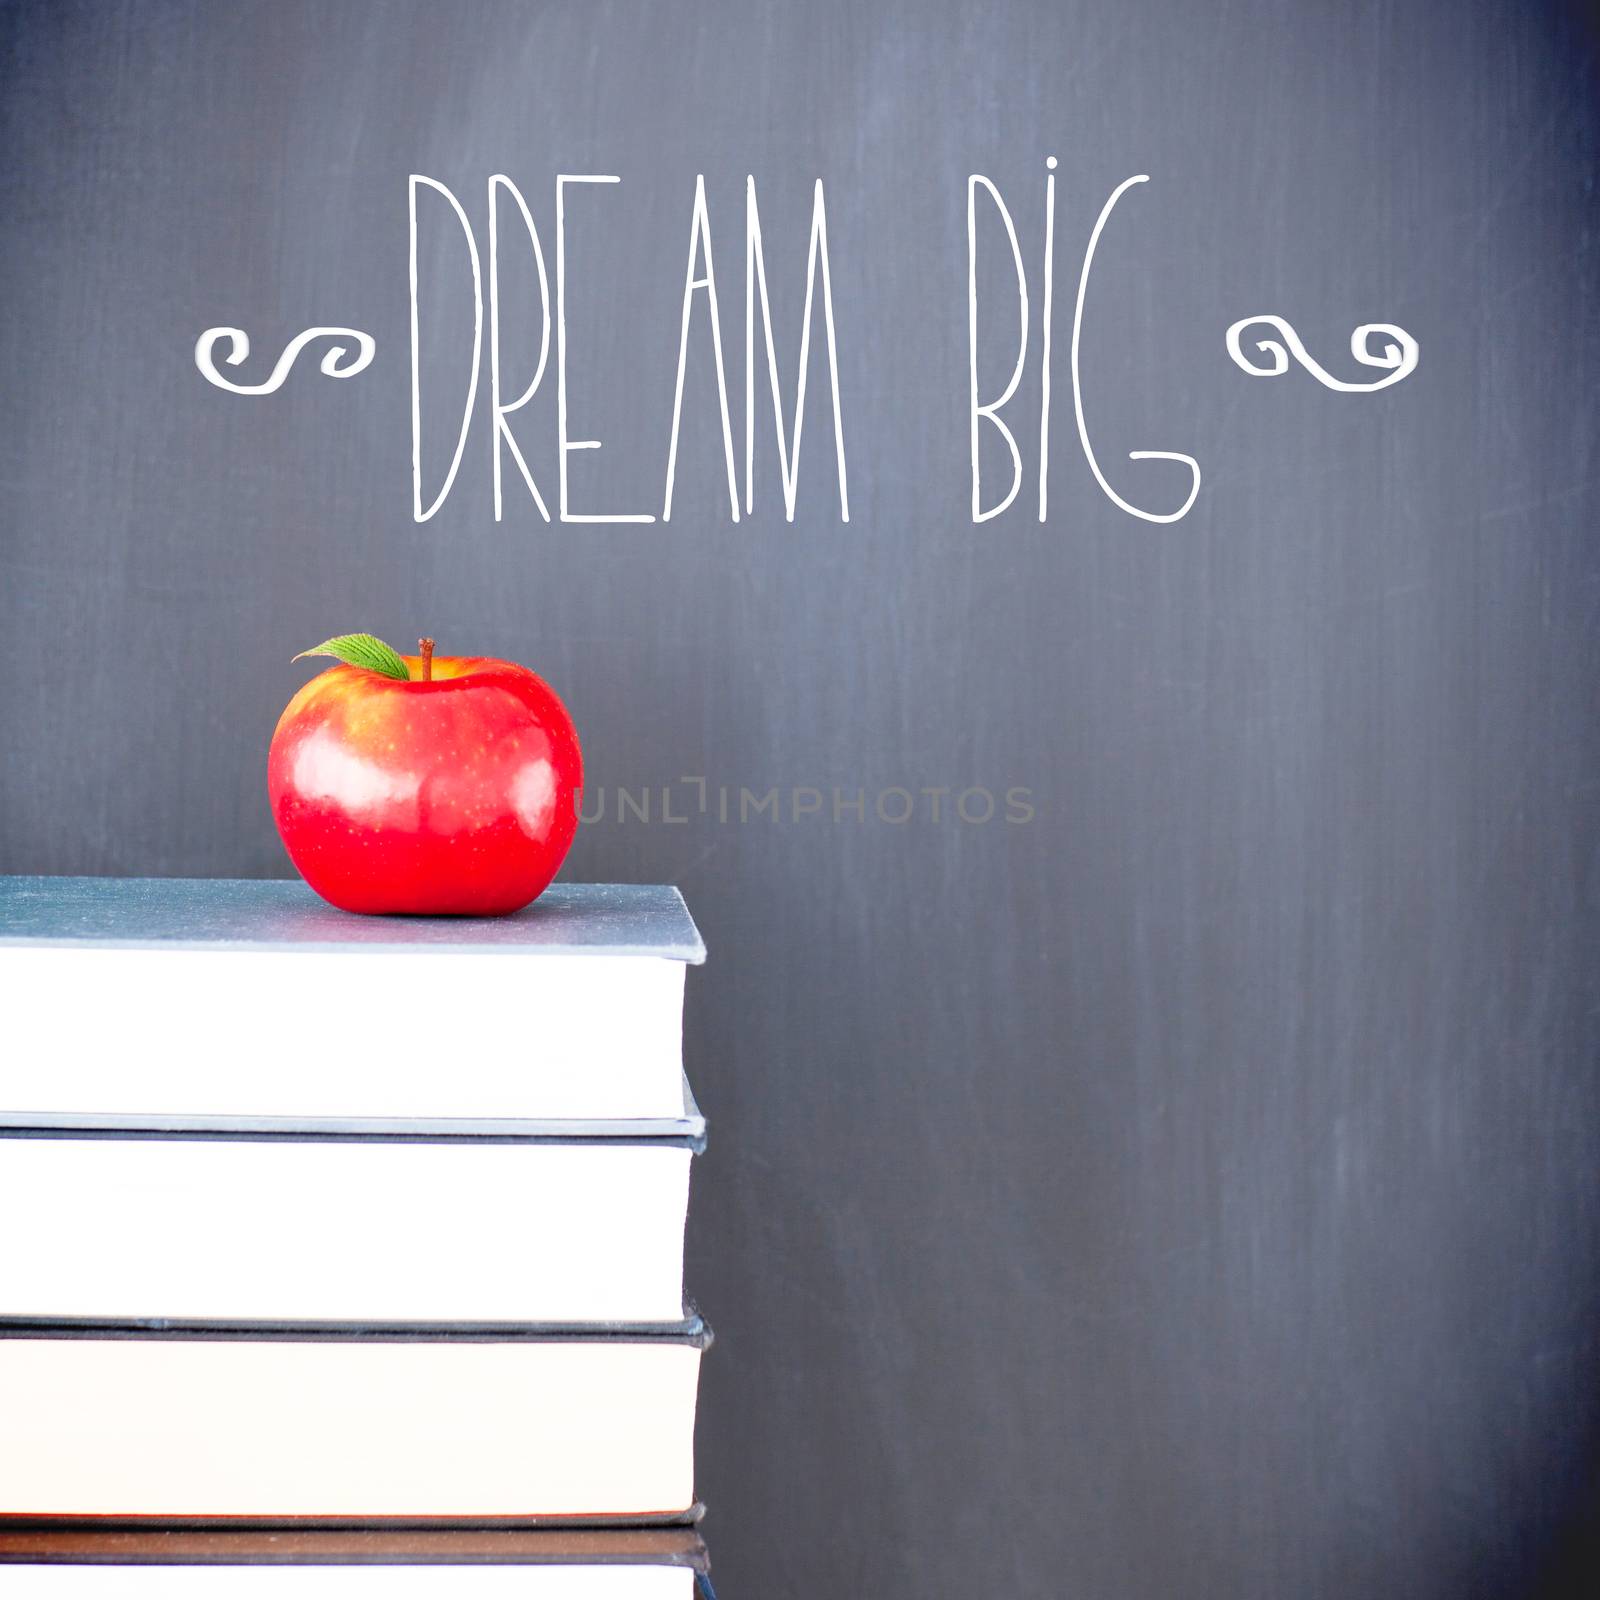 The word dream big against red apple in front of blackboard on books